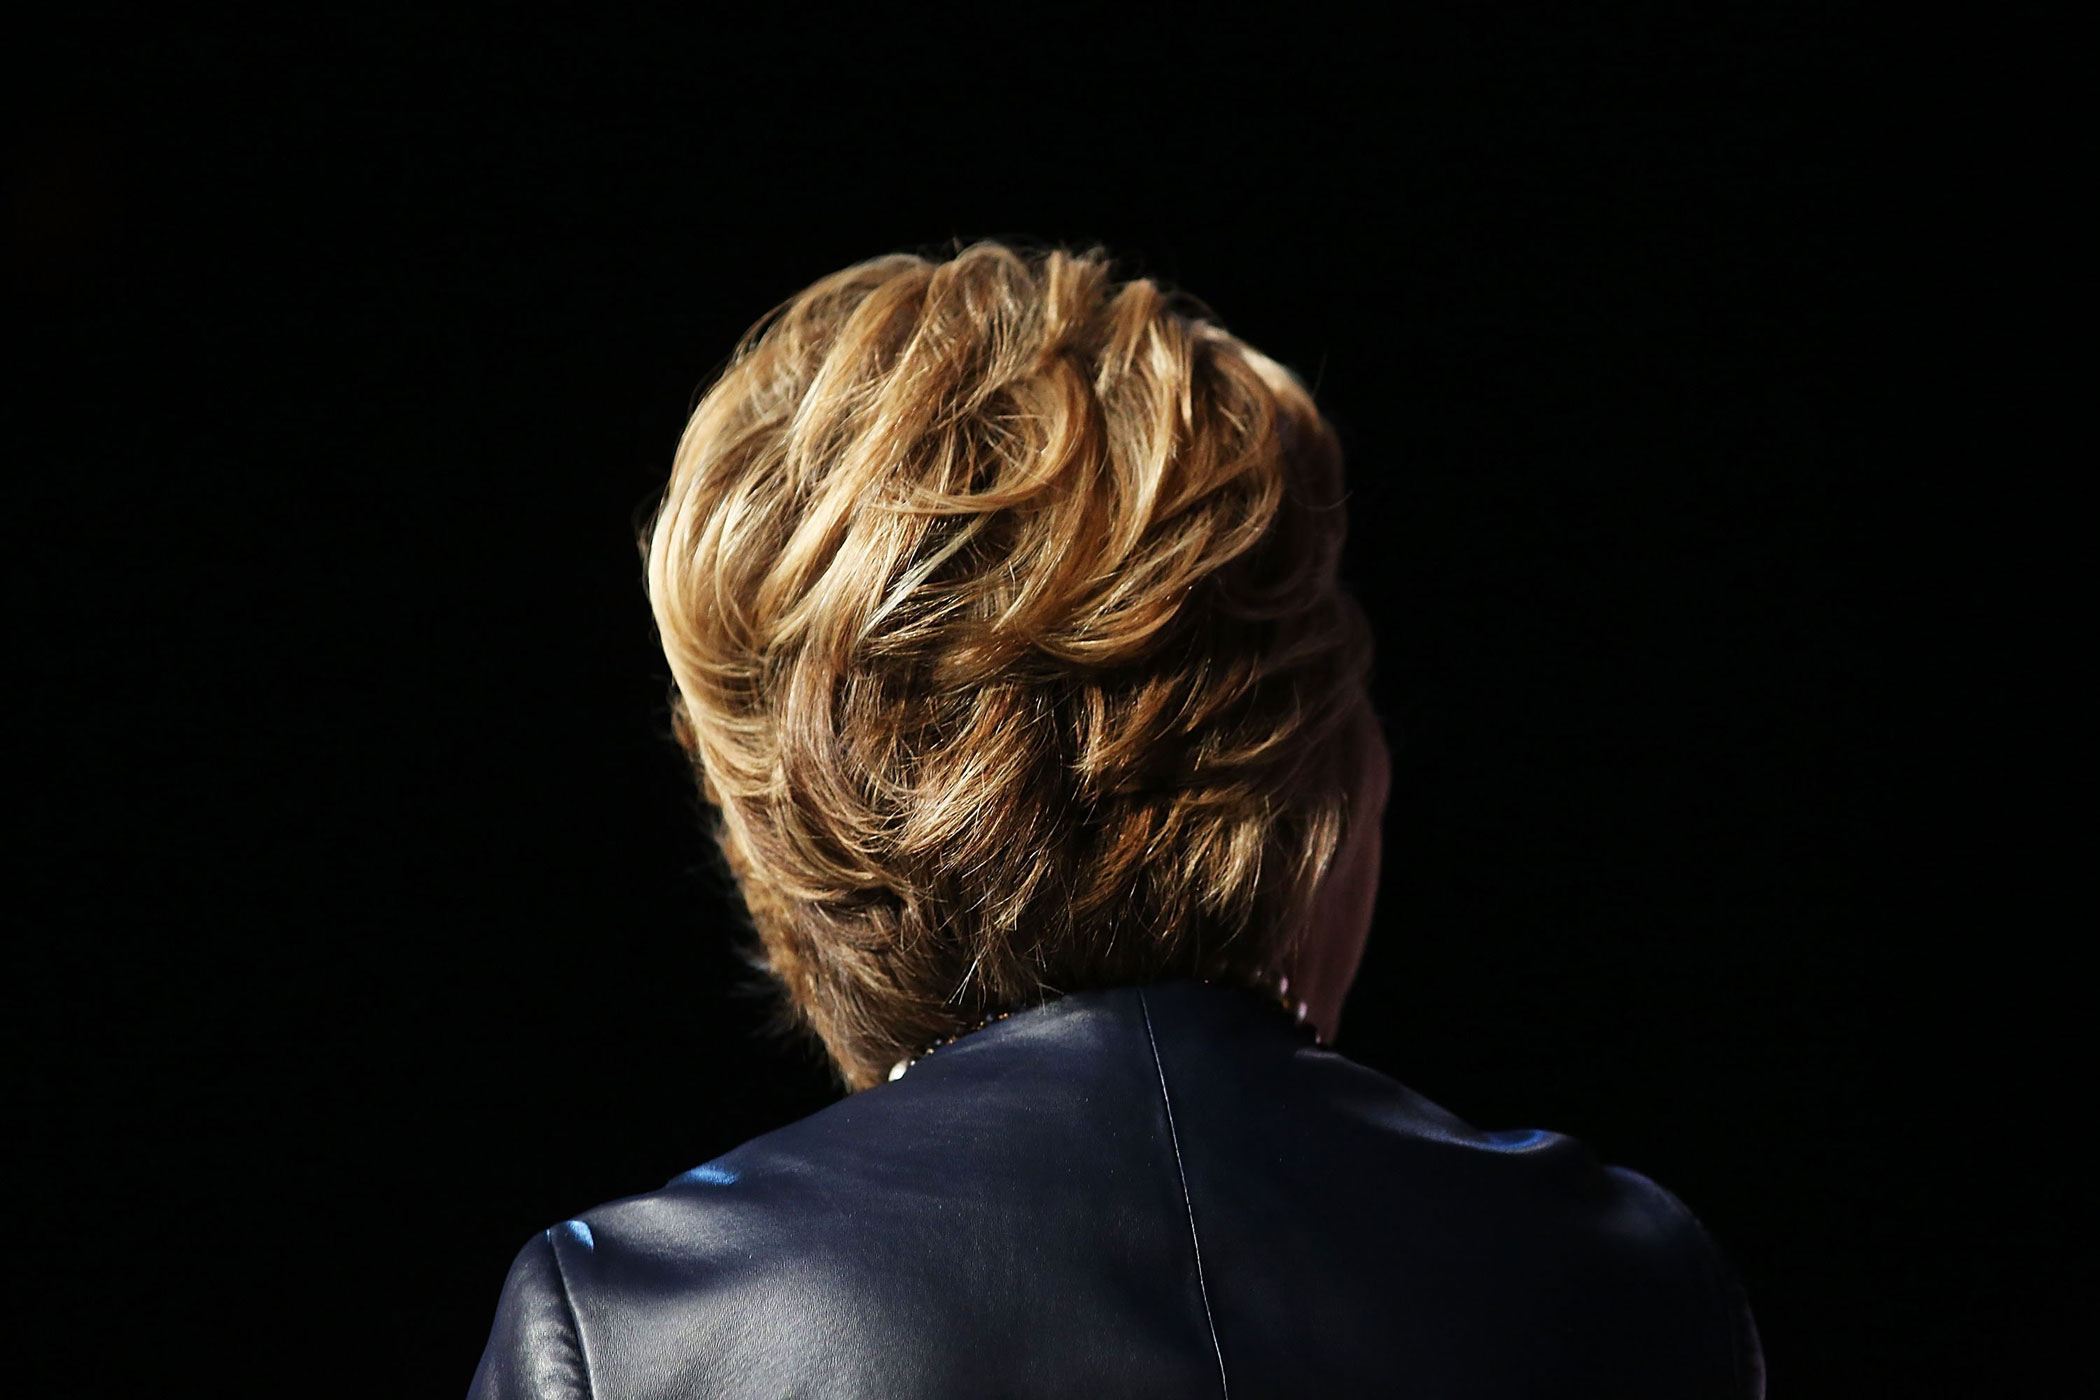 Hillary Clinton speaks on stage in Harlem at the Apollo Theater on March 30, 2016 in New York.